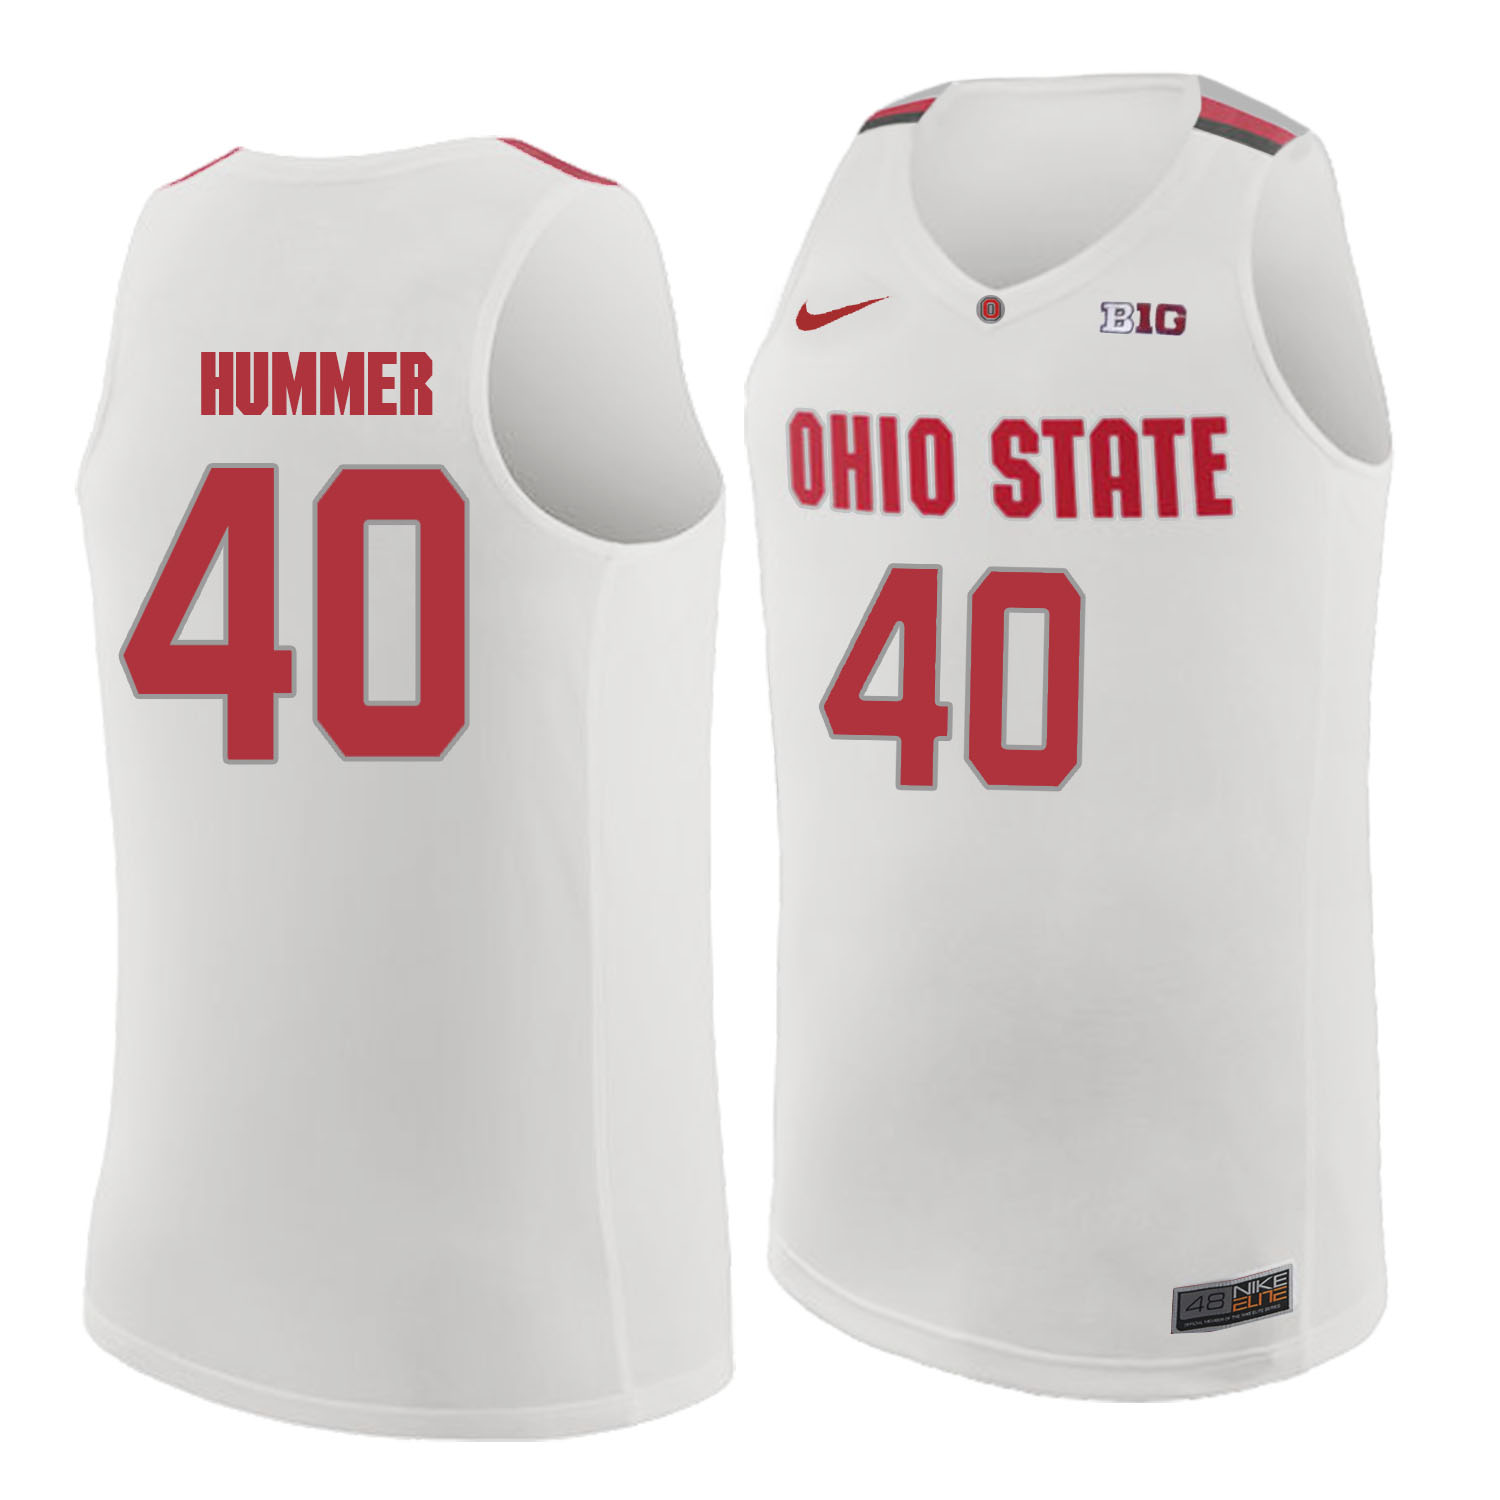 Ohio State Buckeyes 40 Danny Hummer White College Basketball Jersey